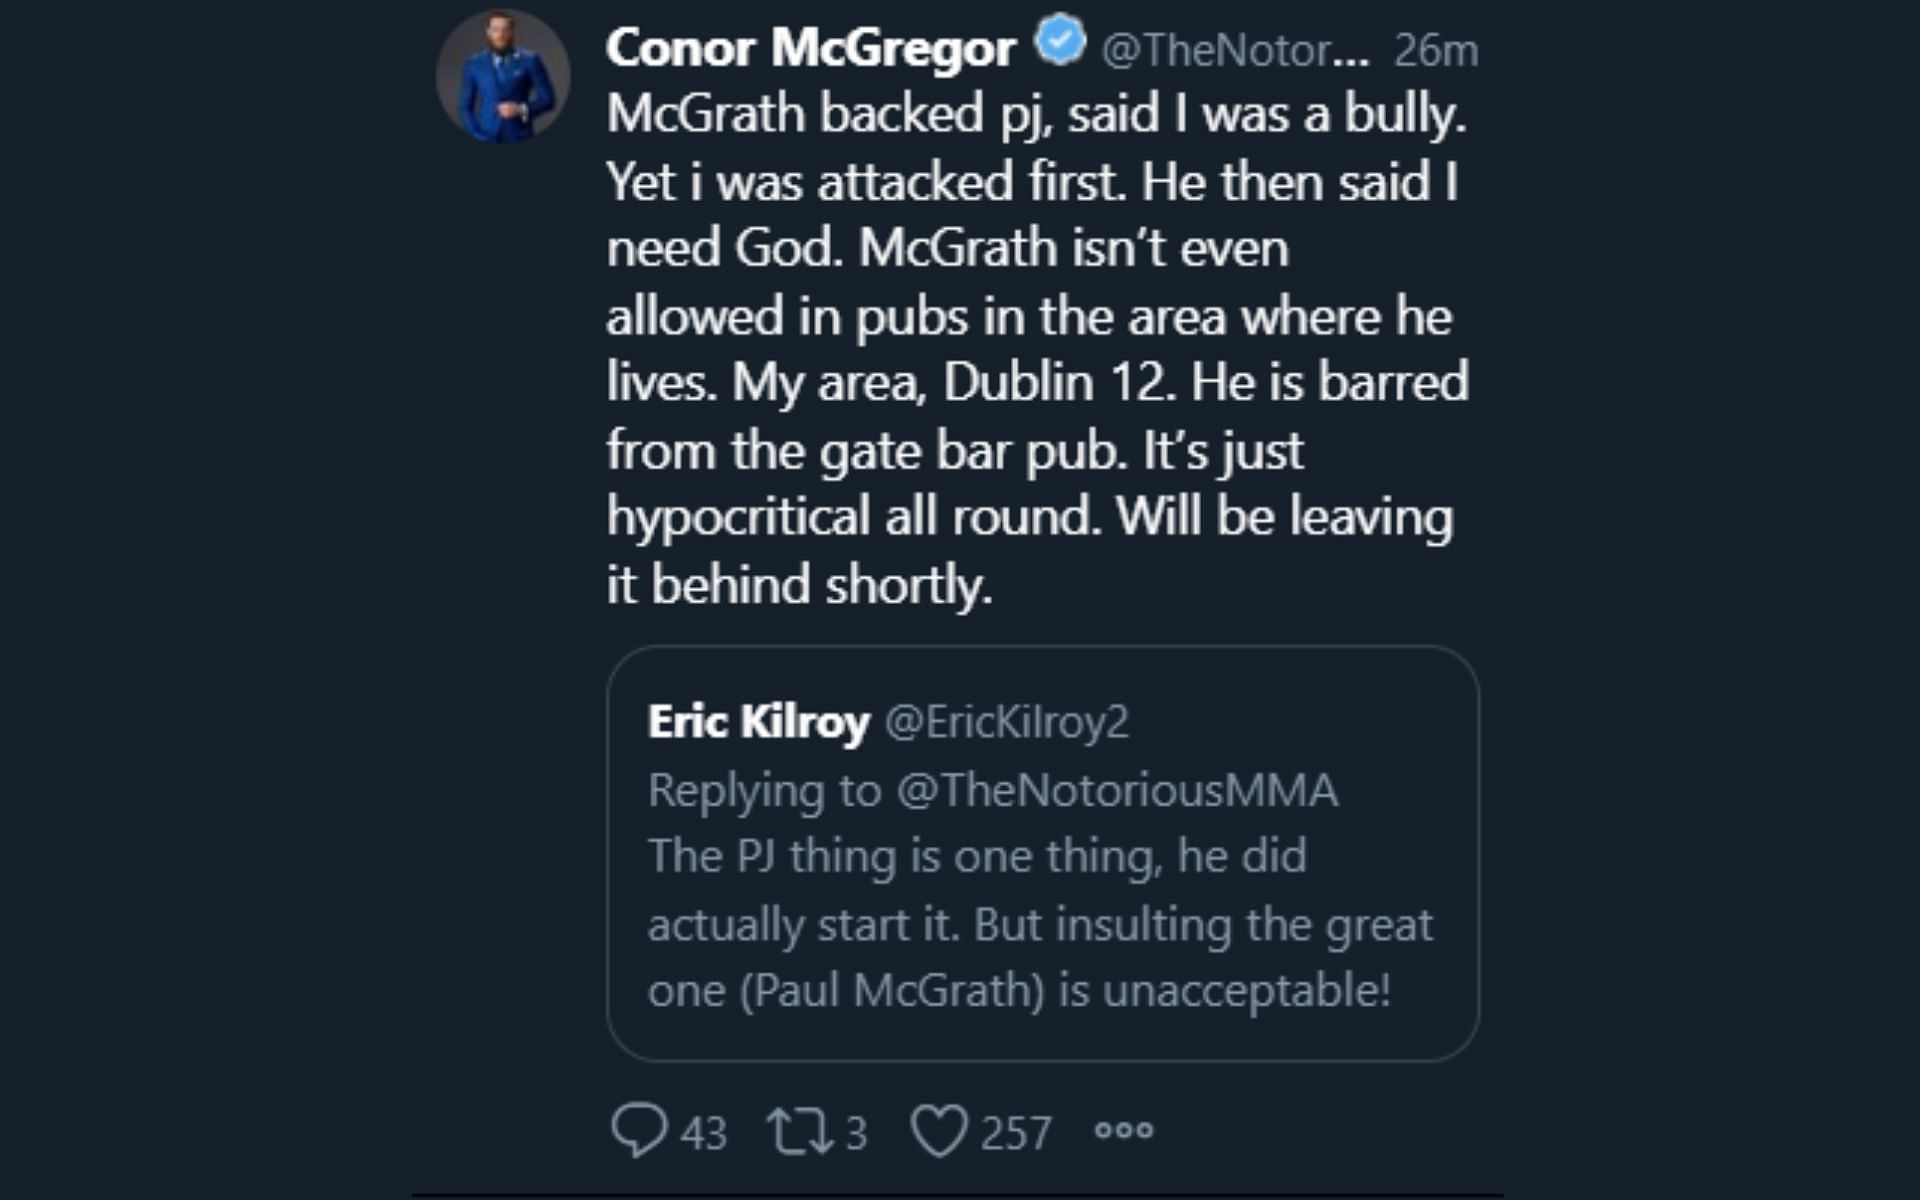 Conor McGregor&#039;s reply to a Twitter user defending Paul McGrath [Image courtesy: @TheNotoriousMMA Twitter]